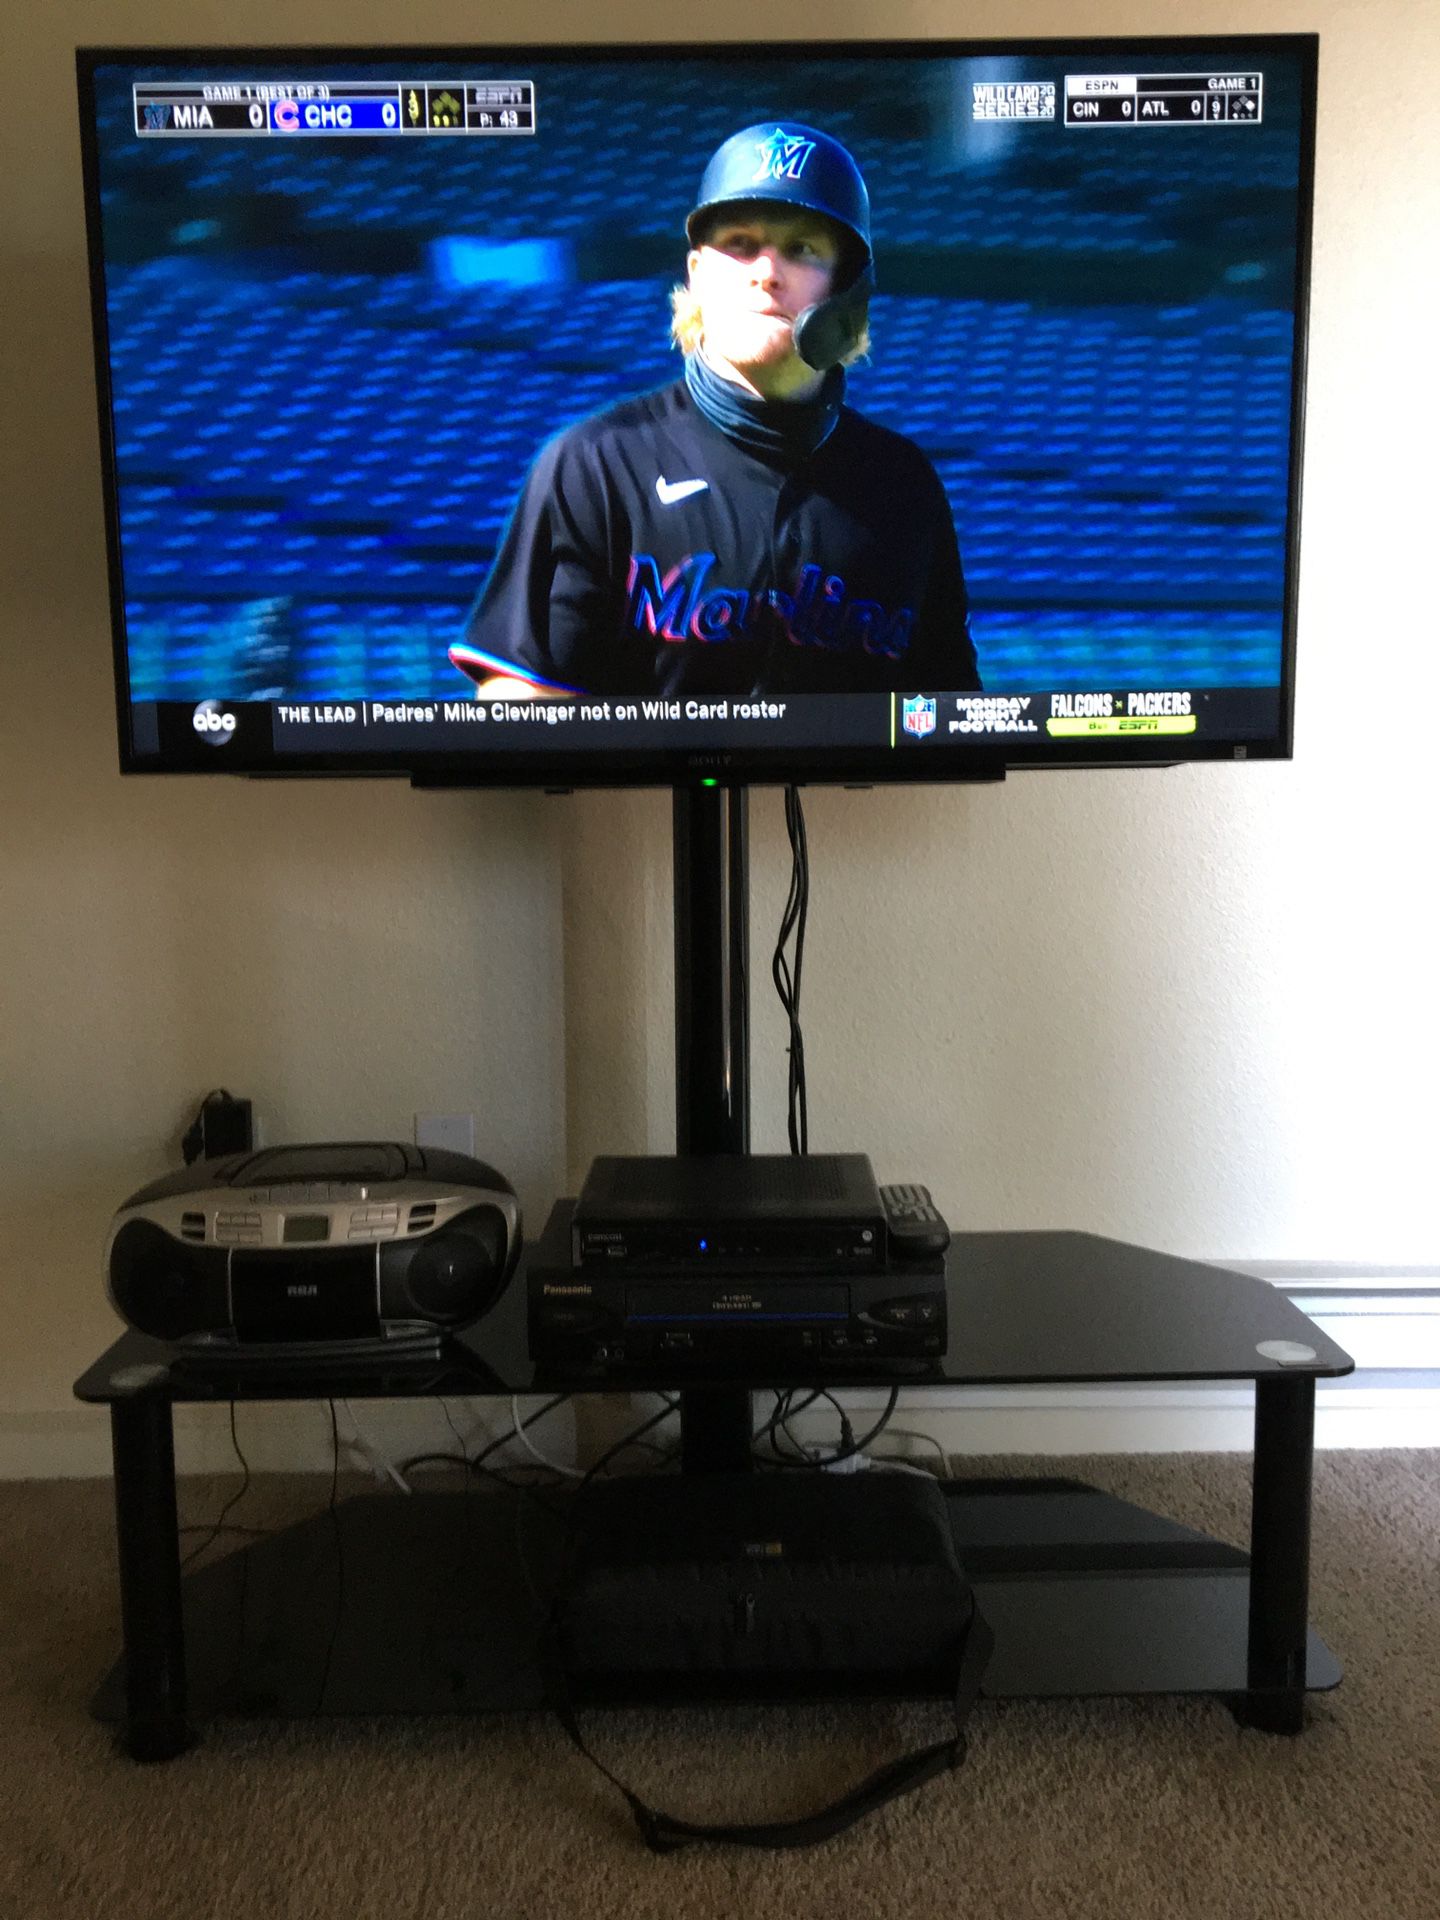 48” Sony LED Tv and stand